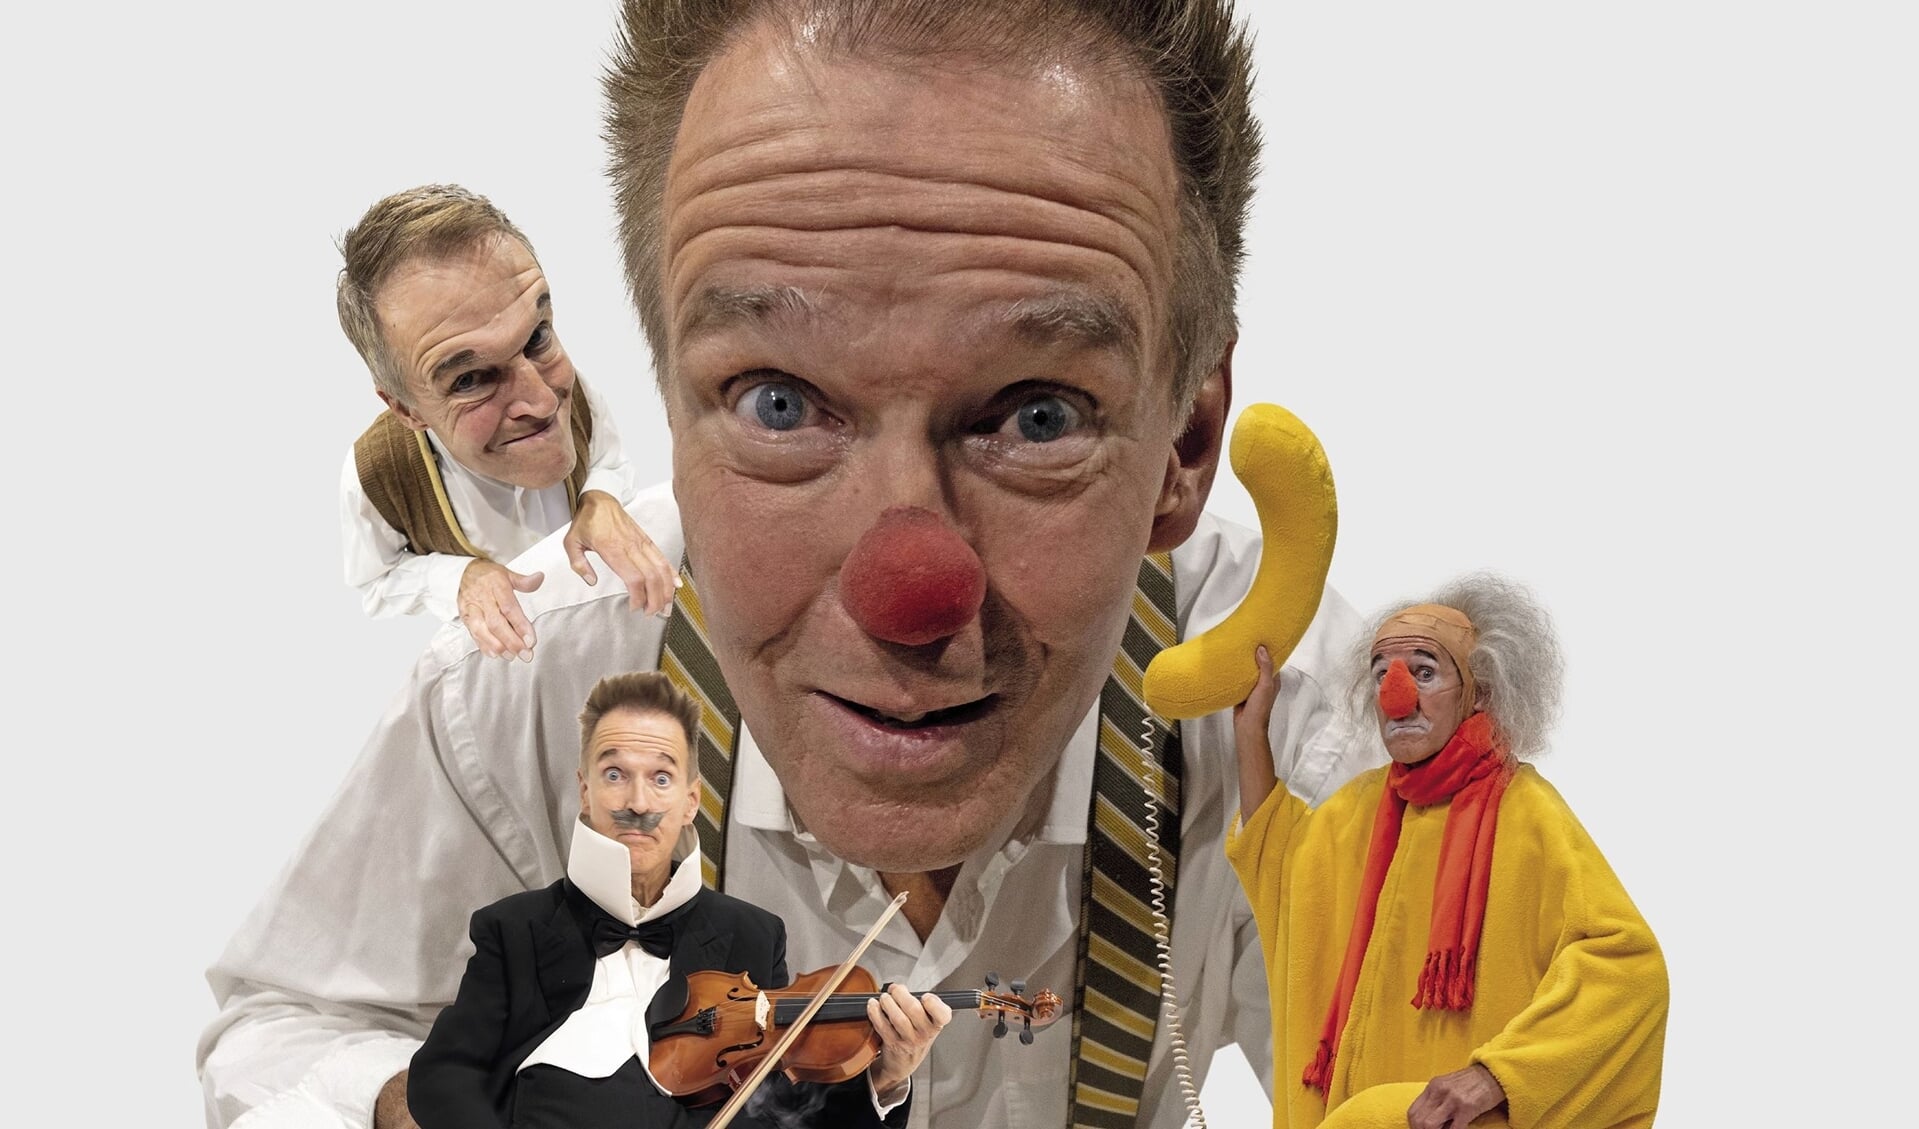 'Hommage aan de clown - Chaplin and other famous clowns by Arno'. 